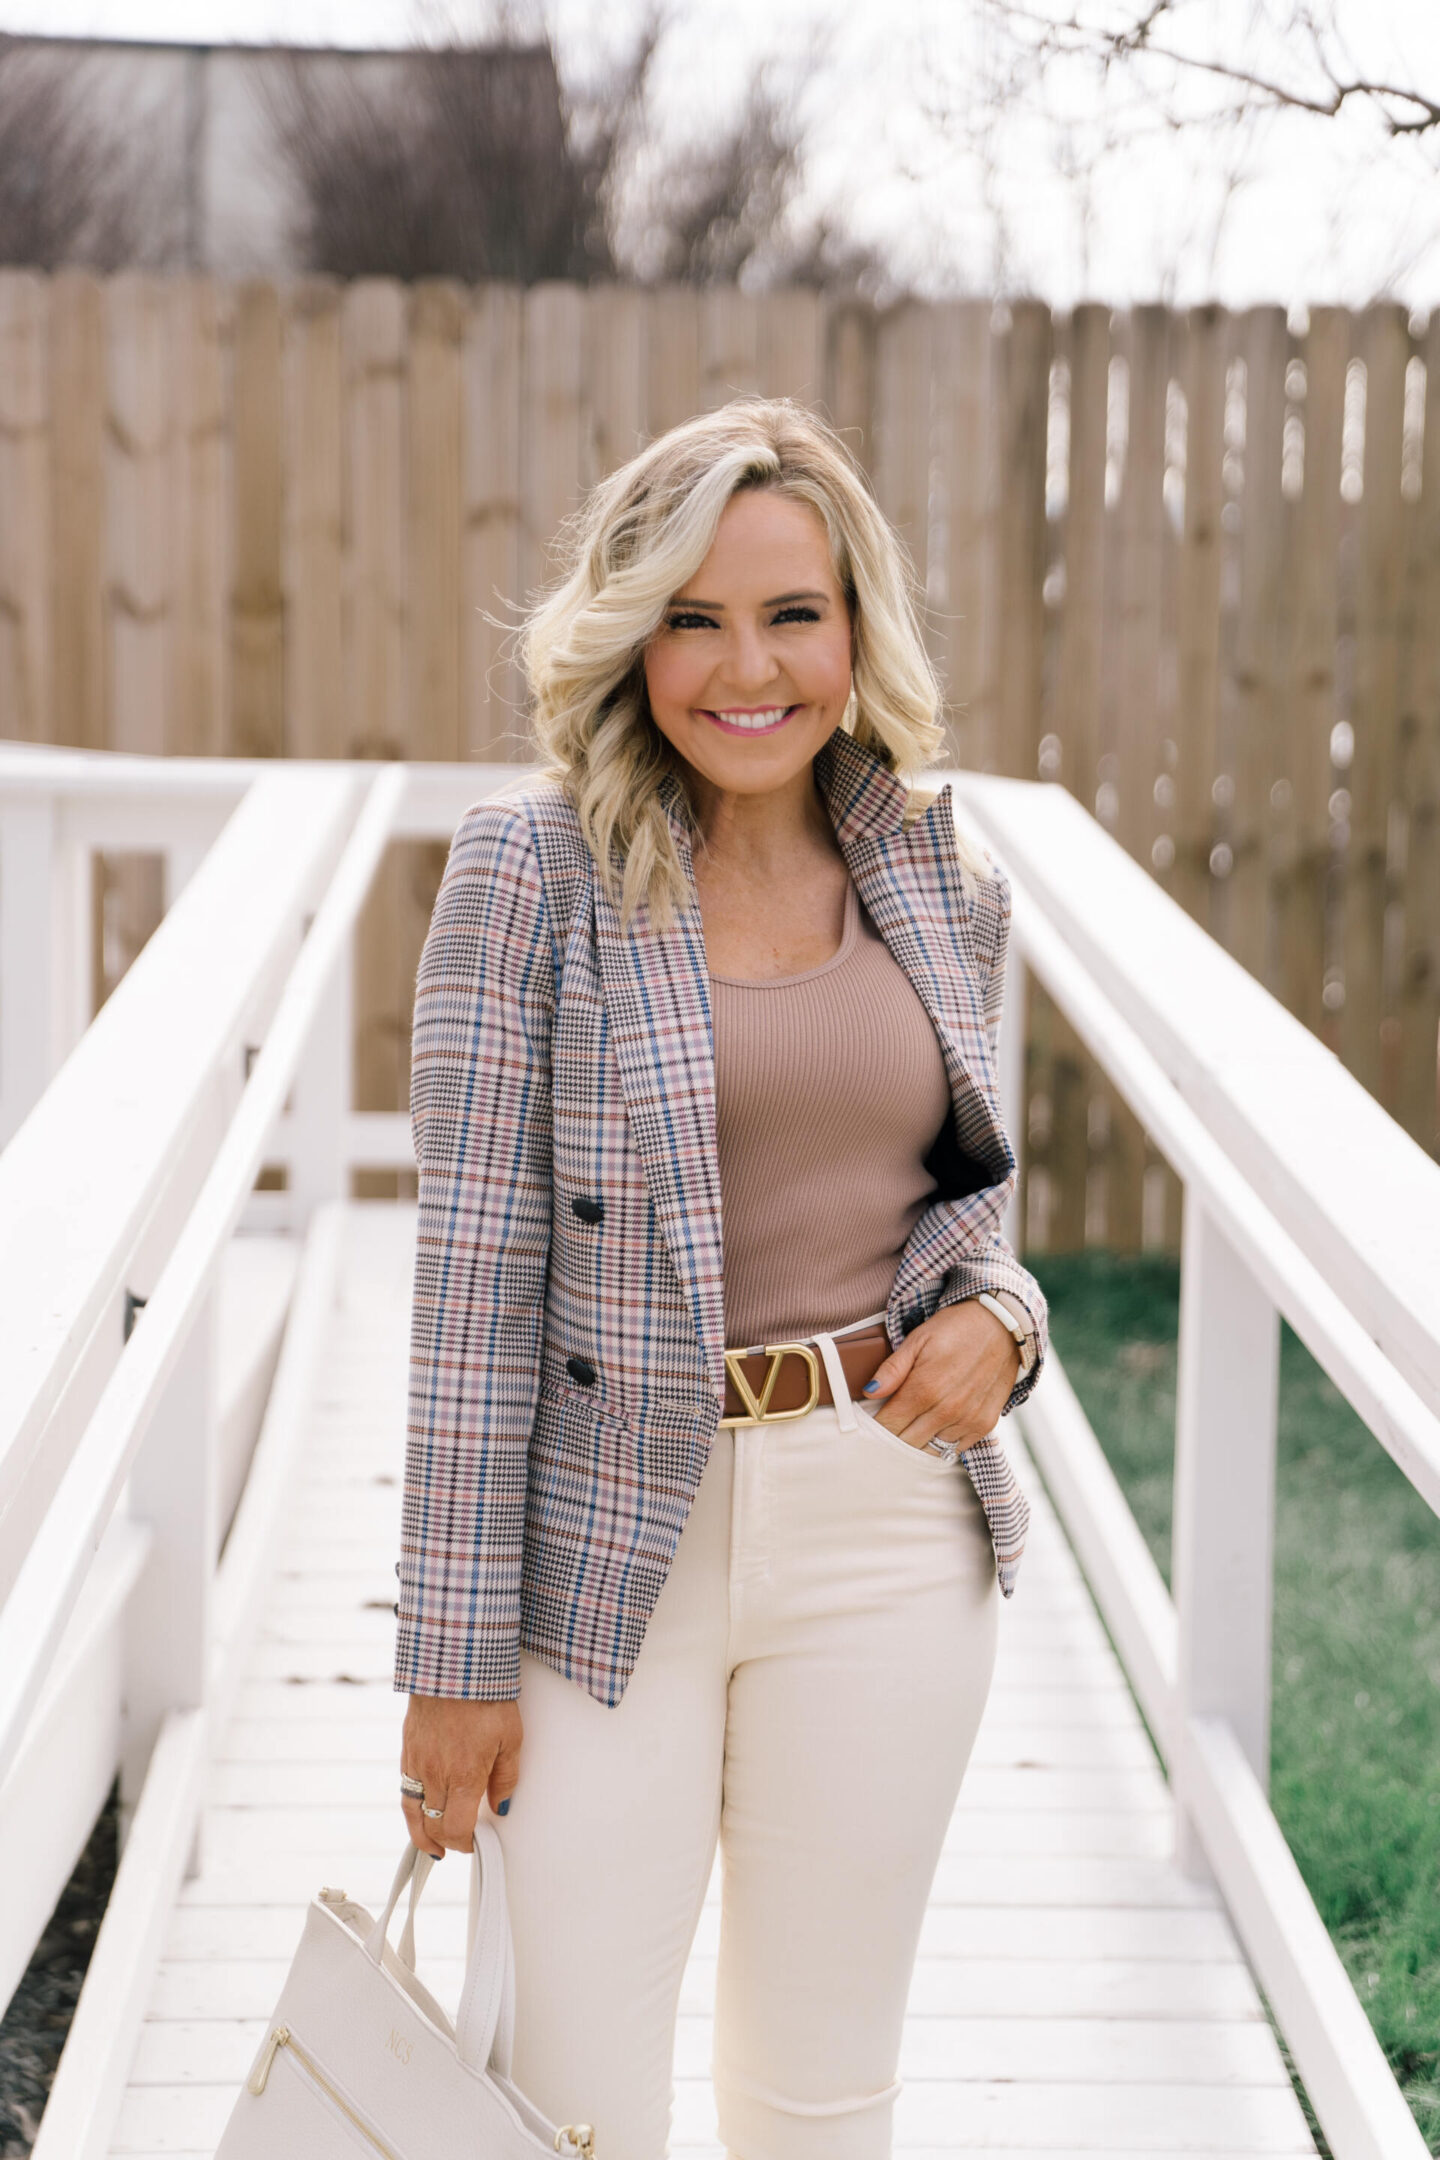 fun workwear basics for her  featured by top Nashville fashion blogger, Hello Happiness.